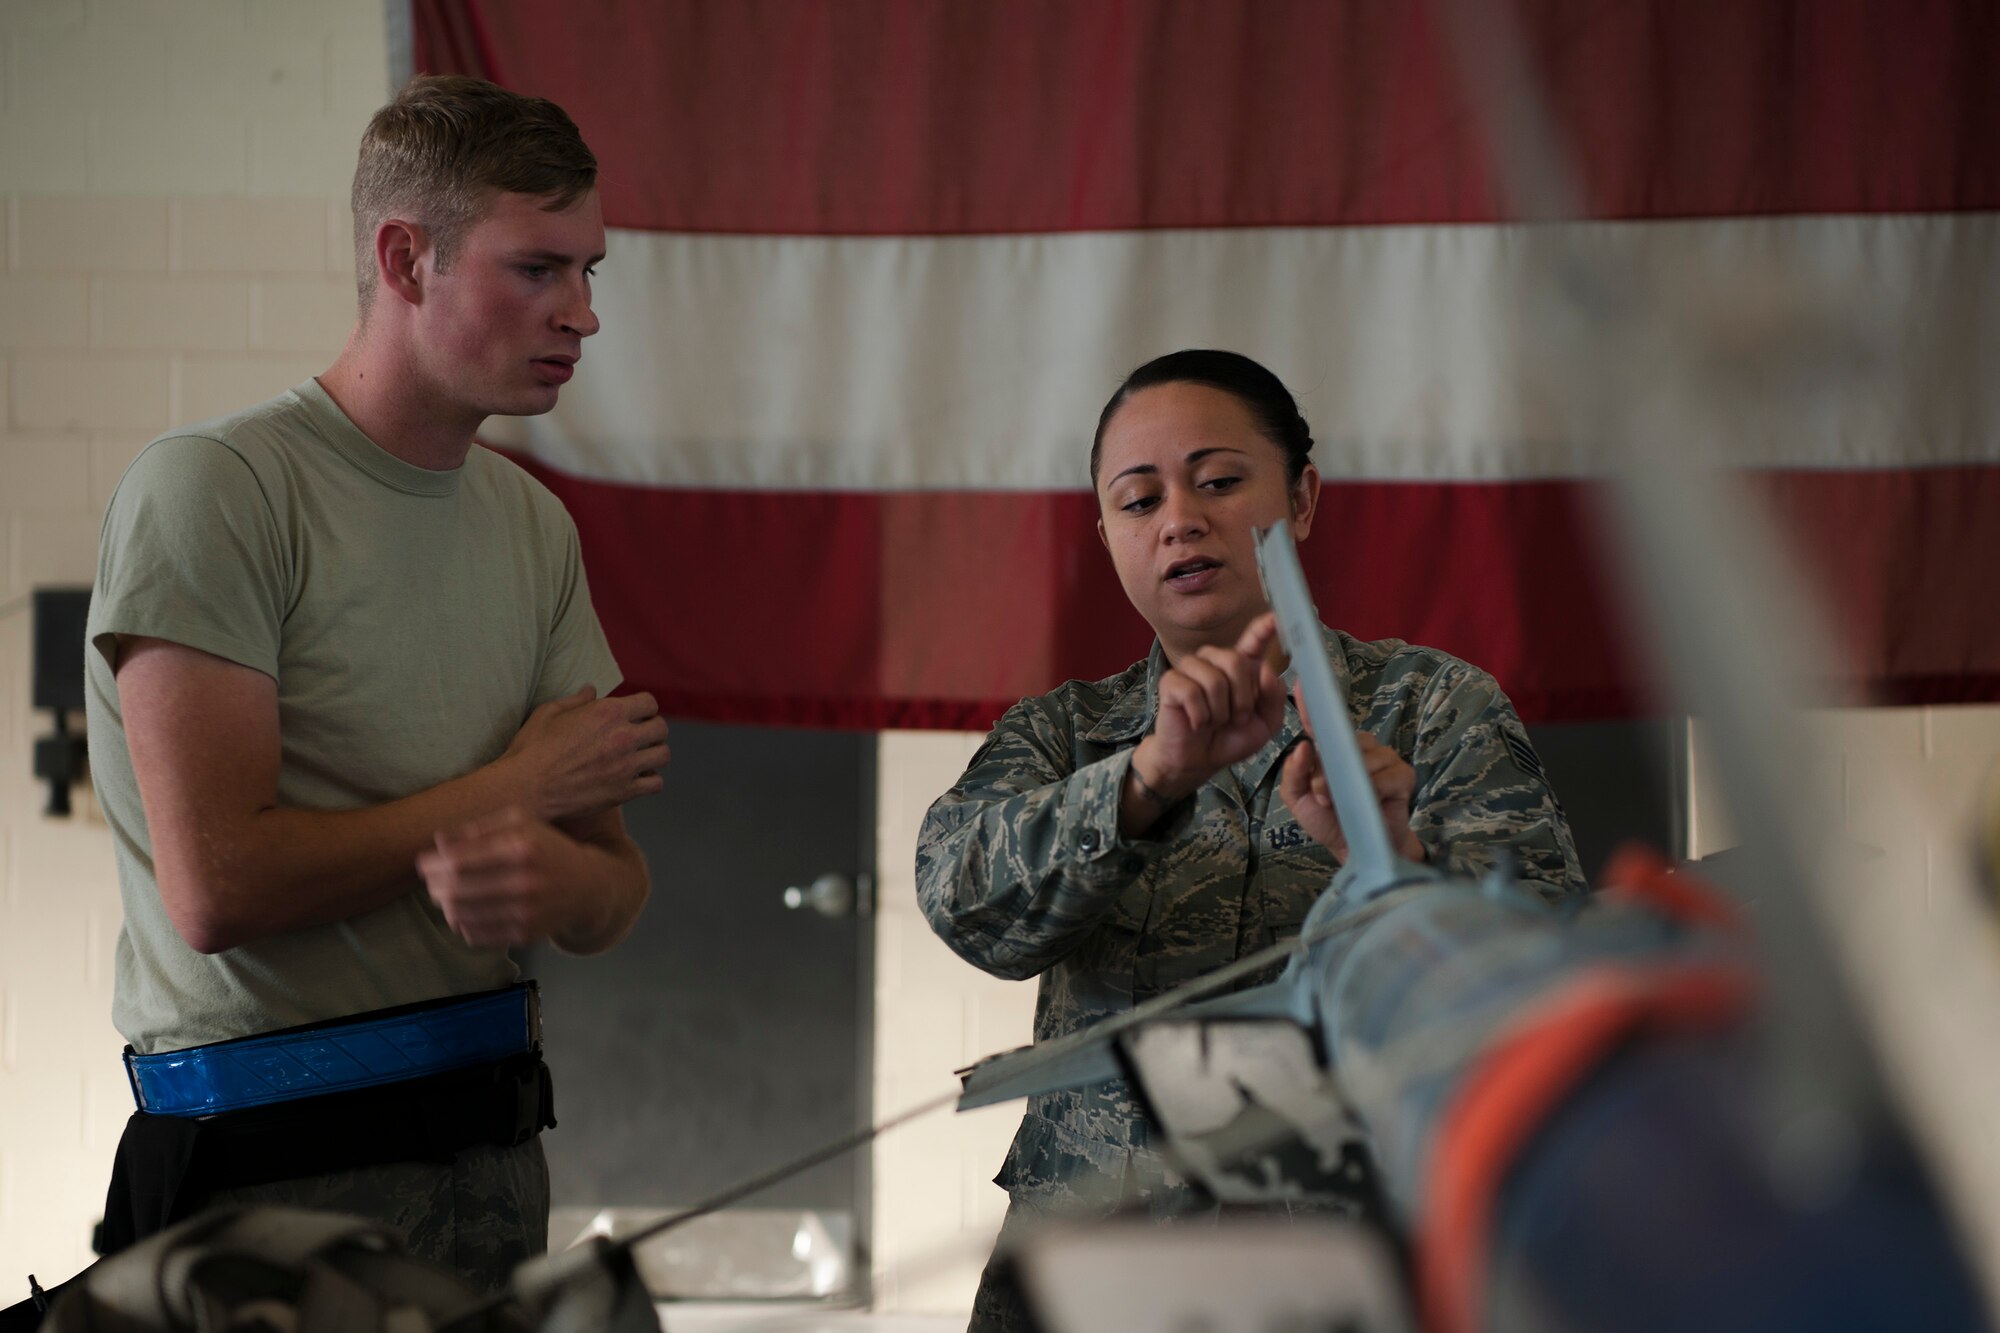 Staff Sgt. Raynette Hardcastle, right, 23d Maintenance Group lead crew chief, teaches Senior Airman Robert Monk, 23d Aircraft Maintenance Squadron weapons load crew member, during a Monthly Proficiency Required Load (MPRL), Aug. 7, 2018, at Moody Air Force Base, Ga. The weapons standardization section ensures weapons load crews are combat ready through evaluations consisting of MPRLs, semi-annual evaluations and flightline inspections. (U.S. Air Force photo by Airman Taryn Butler)